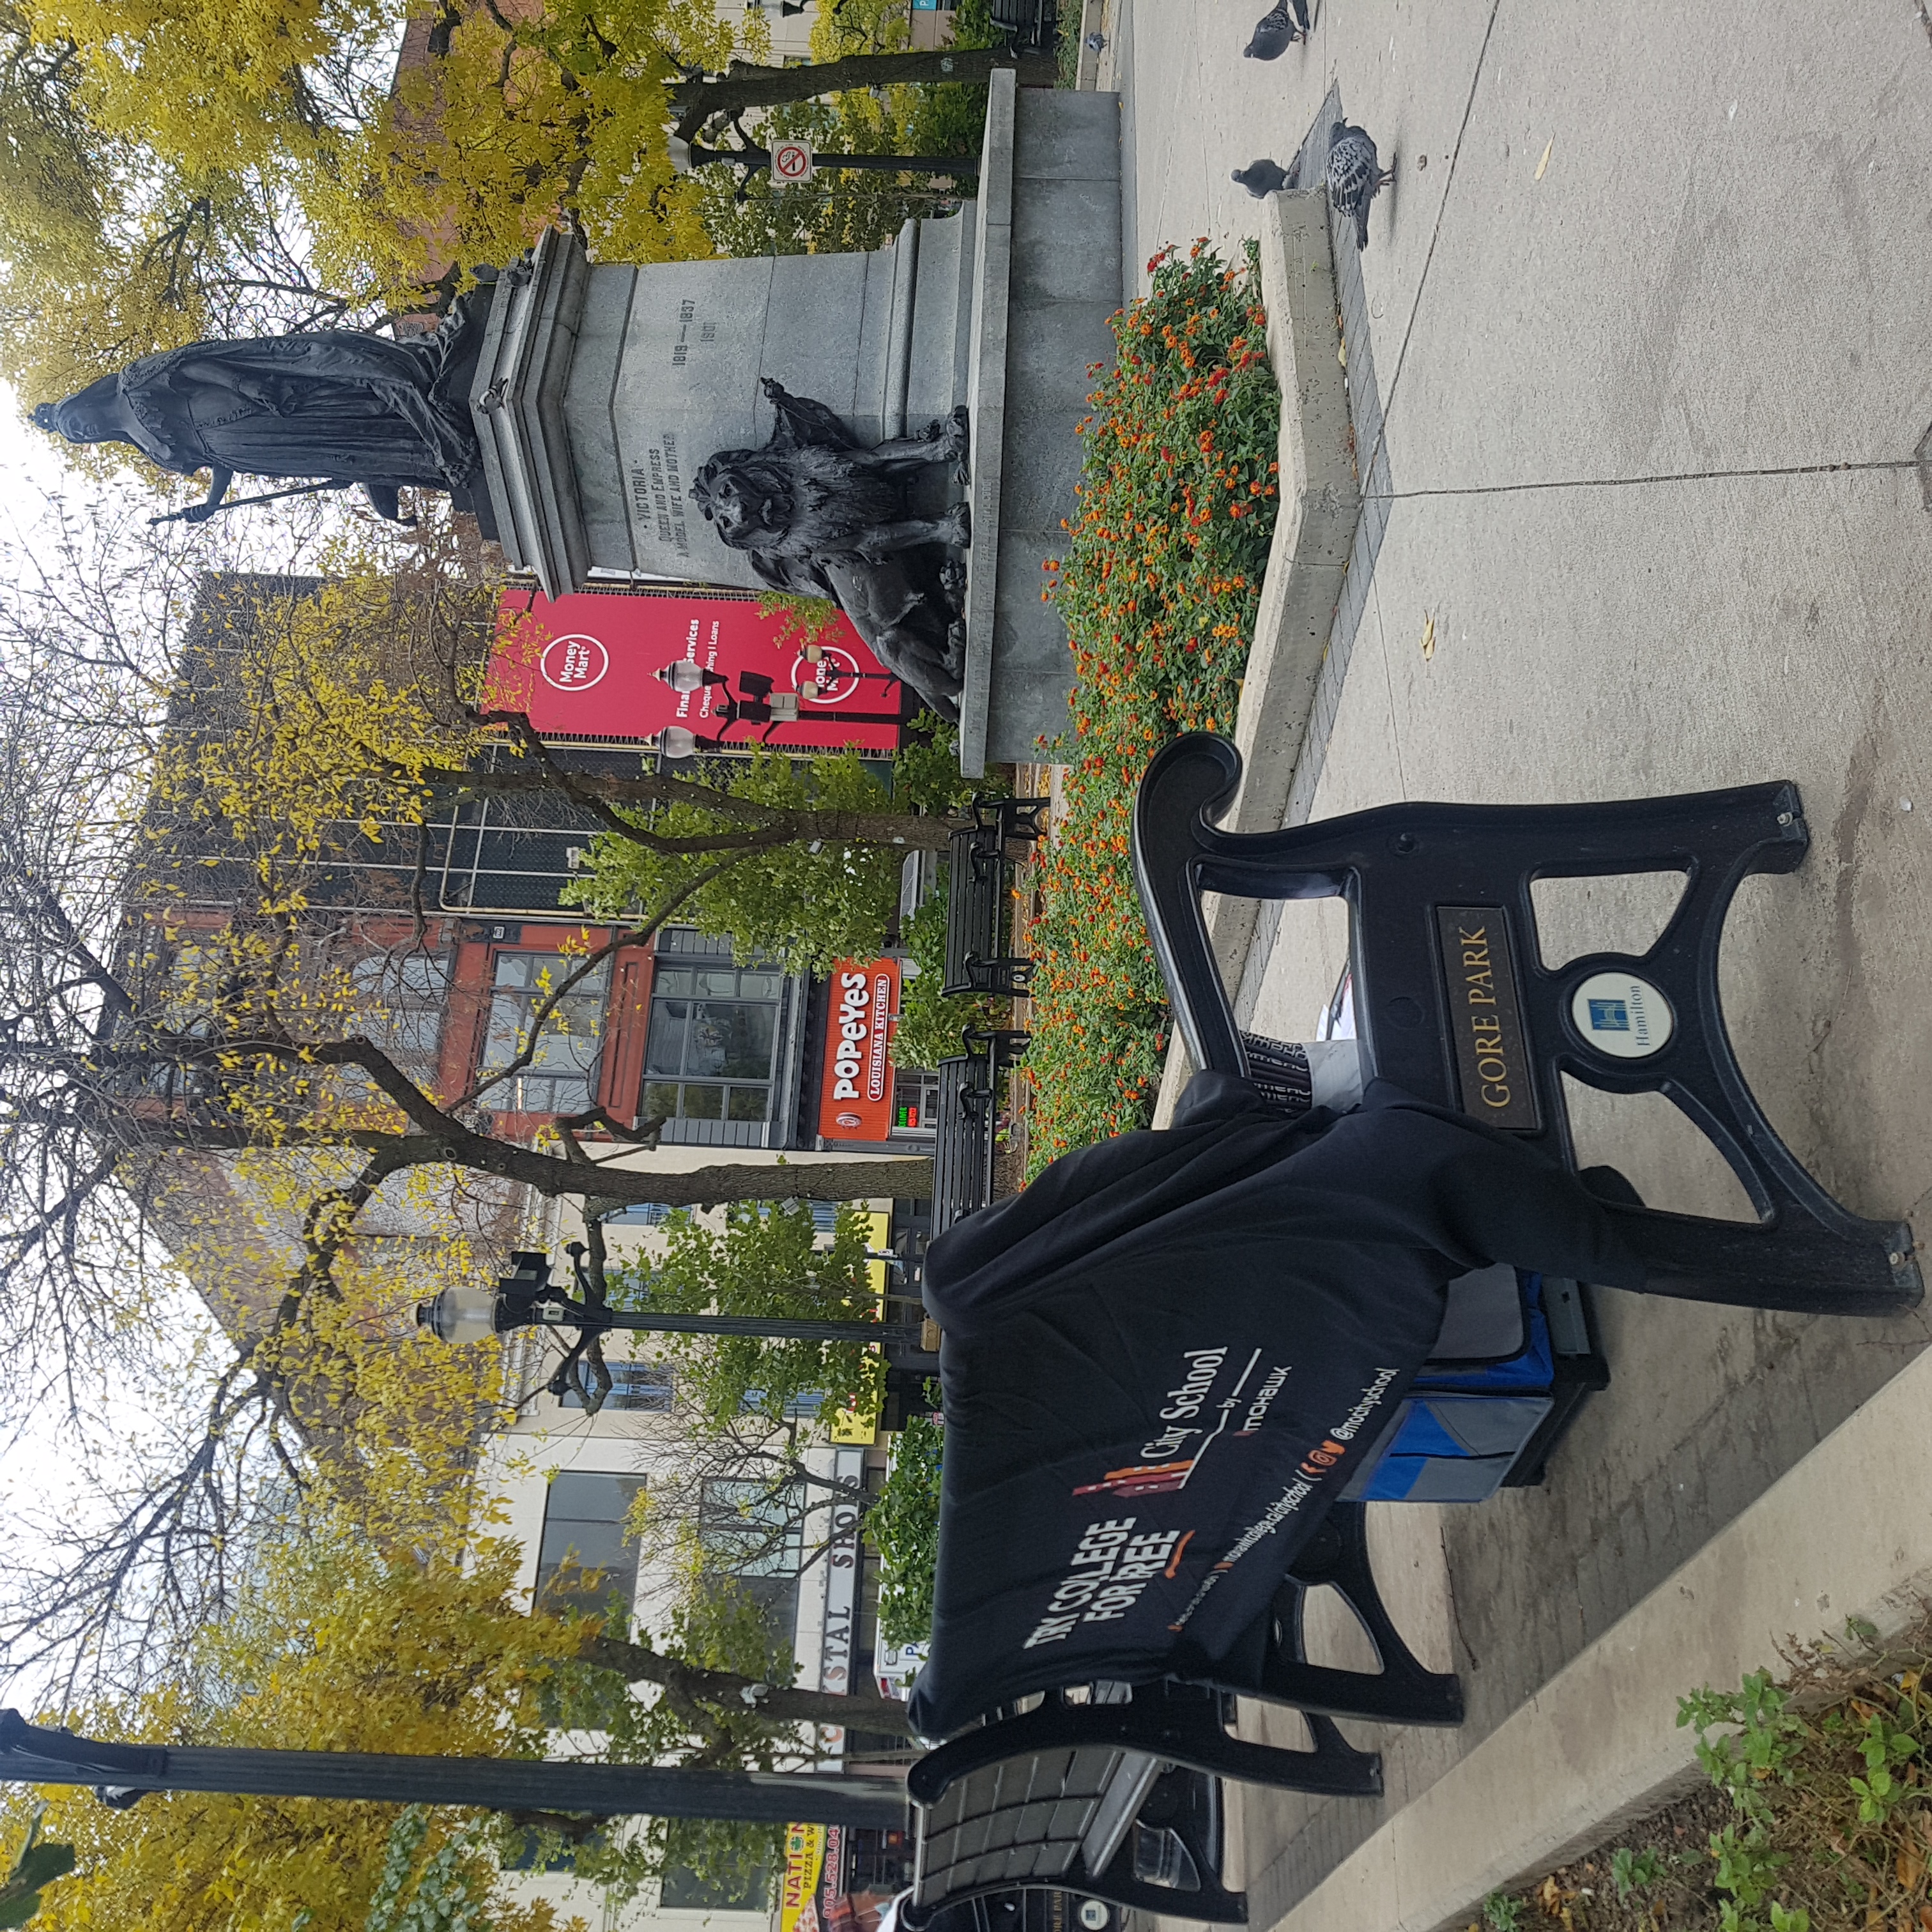 On October 29, 2022, we were in Gore Park